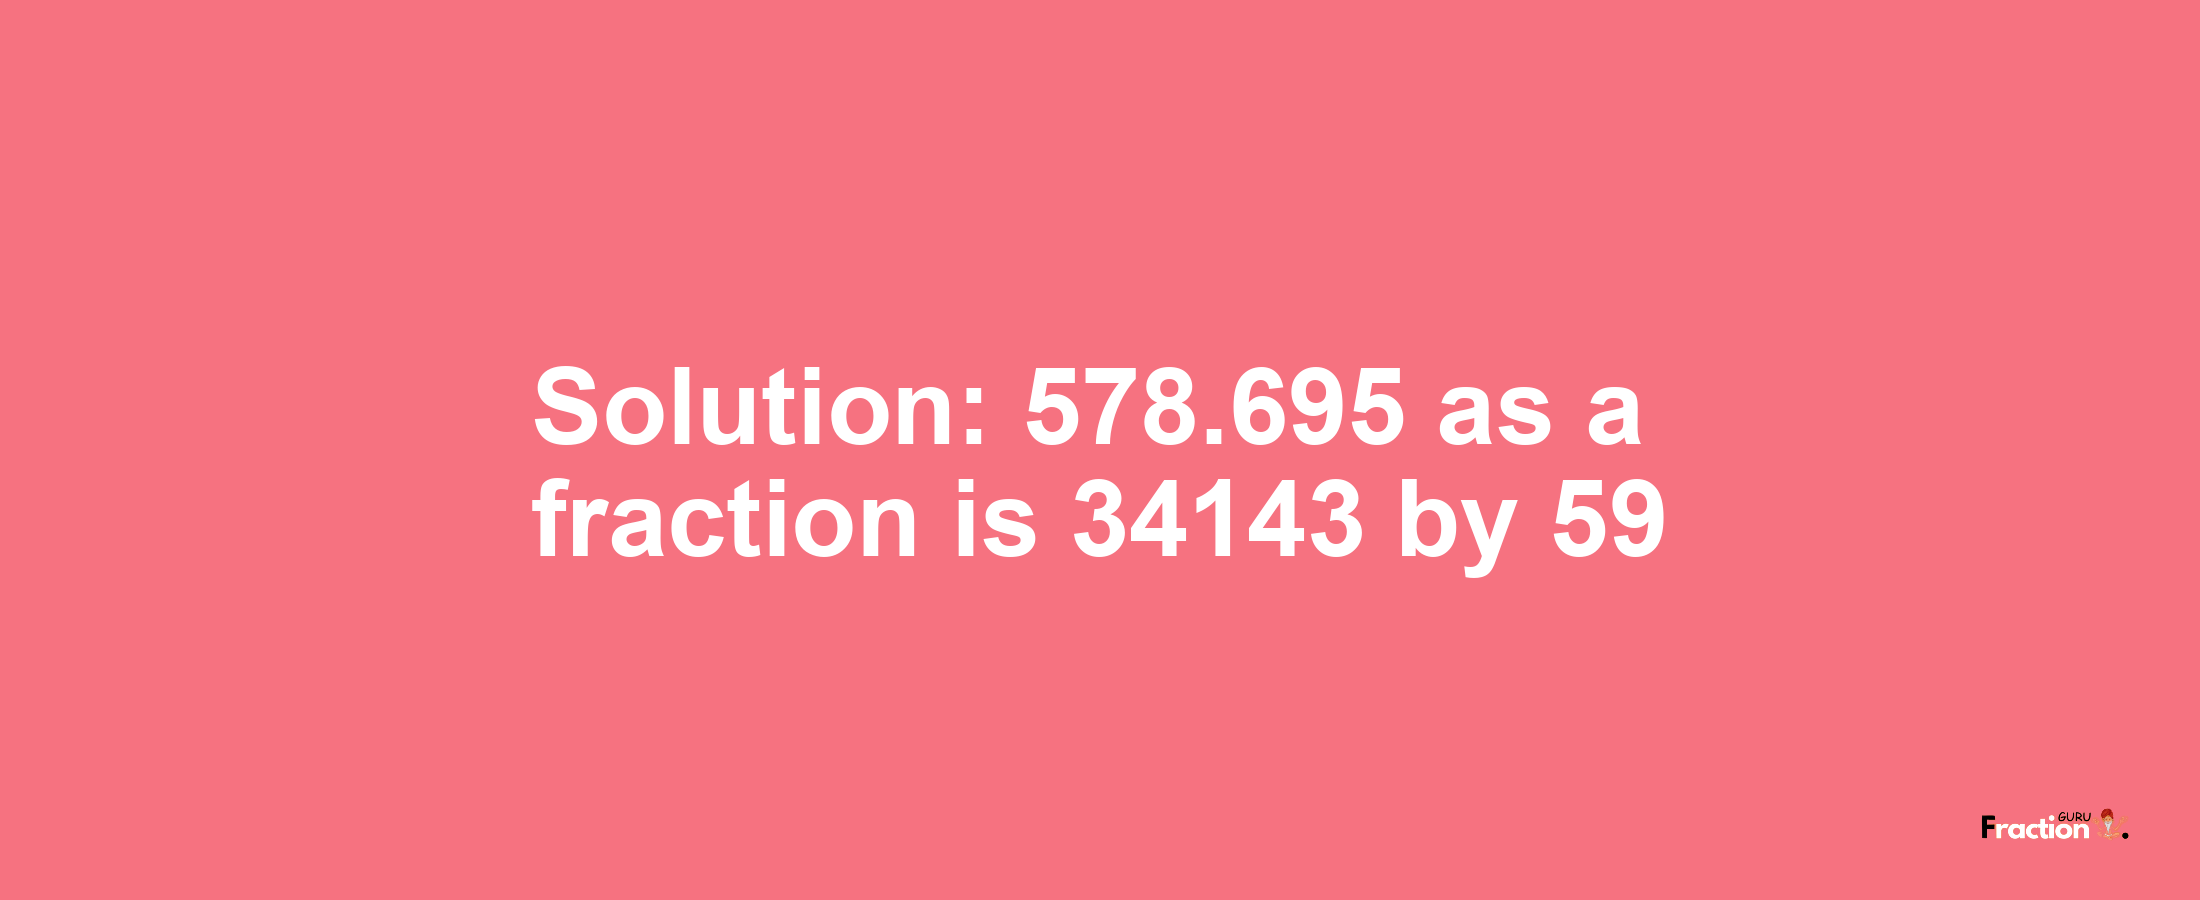 Solution:578.695 as a fraction is 34143/59